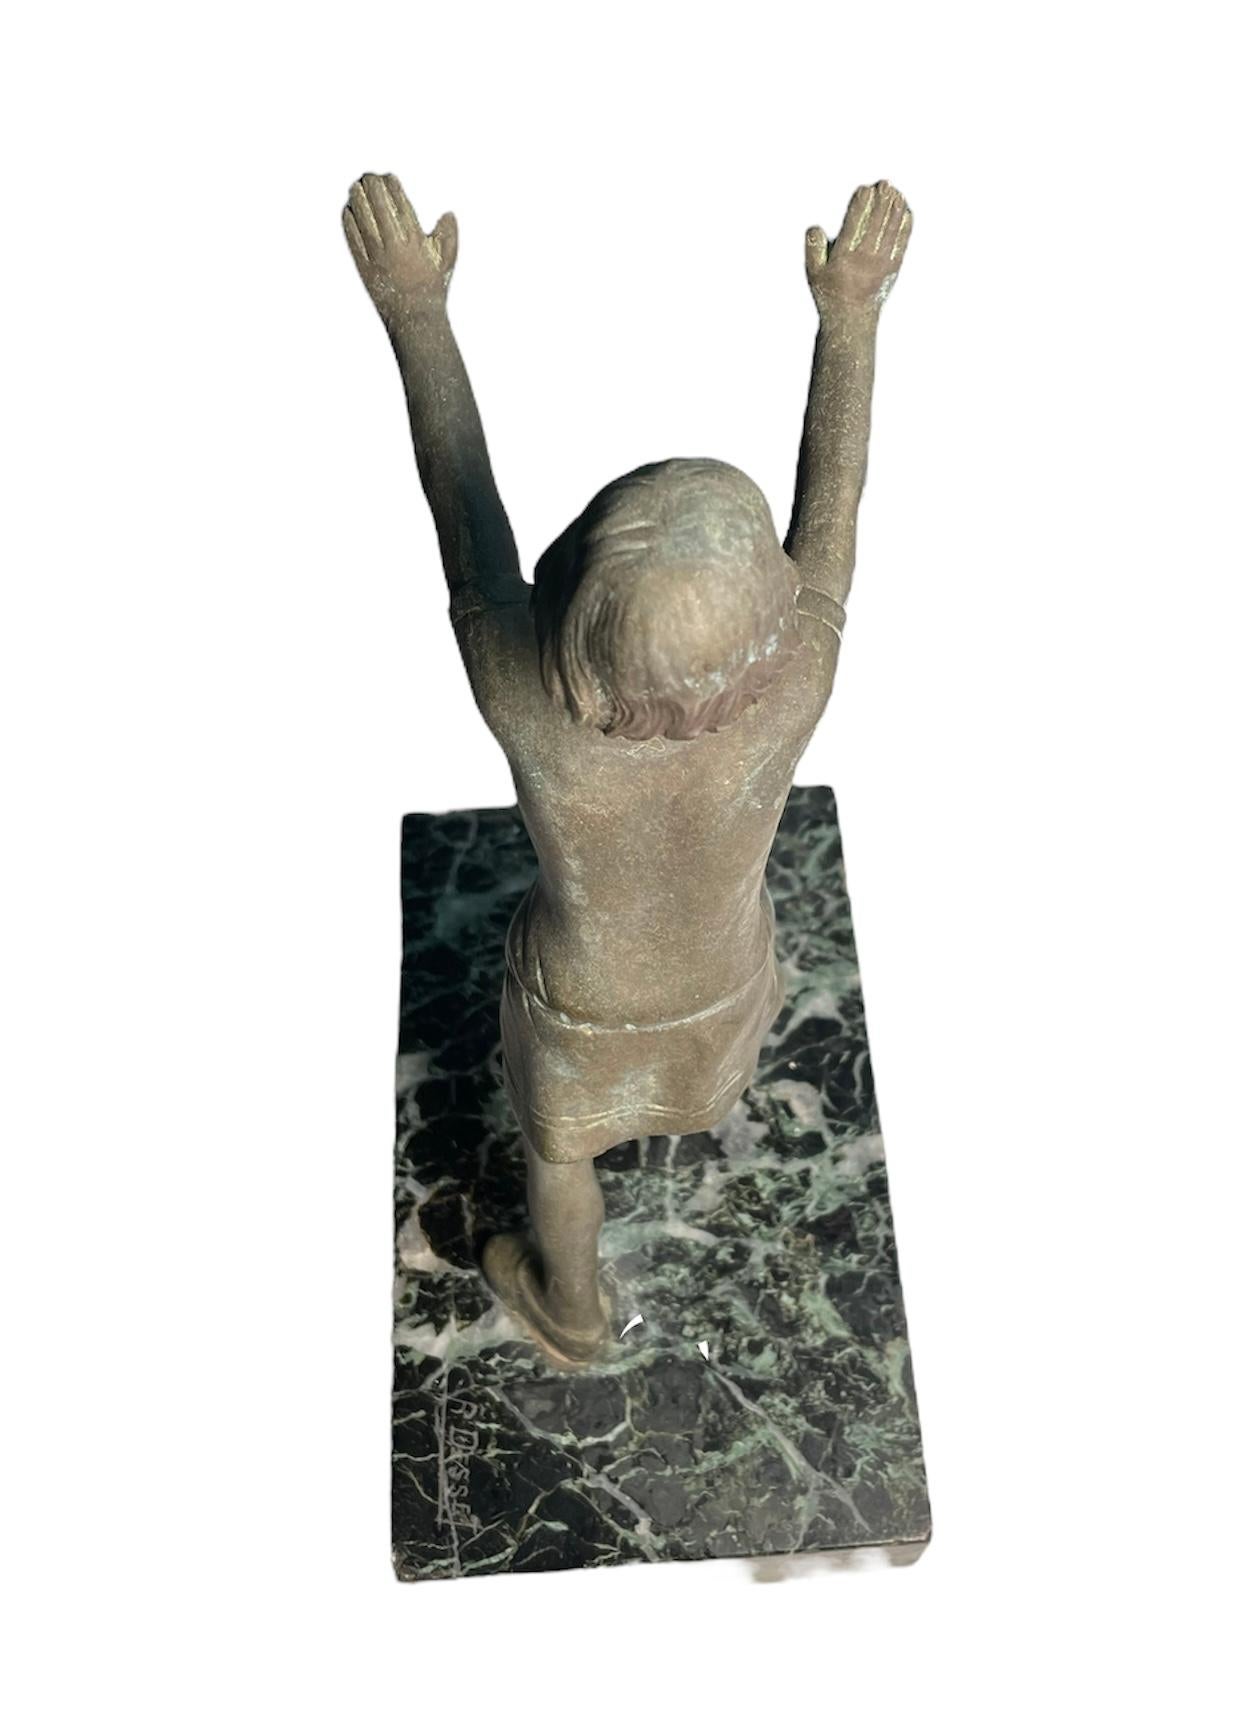 This is a small patinated bronze sculpture of a girl stretching herself and/or trying to push something. The sculpture is supported by a rectangular shaped black and white marble base. A corner of the marble is signed R.Desset.